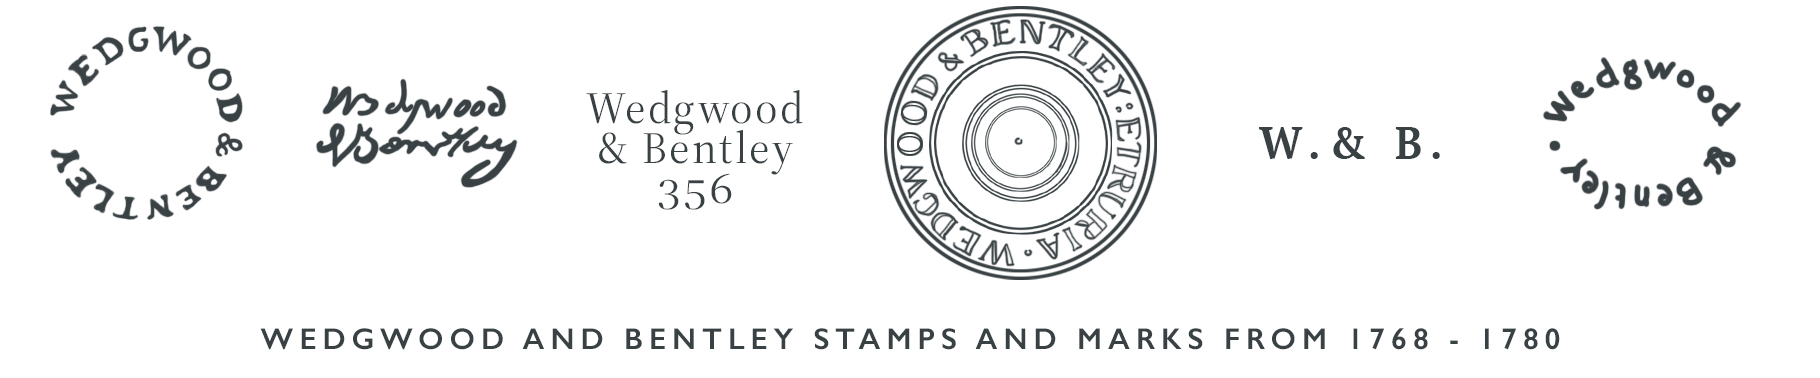 Wedgwood and bentley makers marks